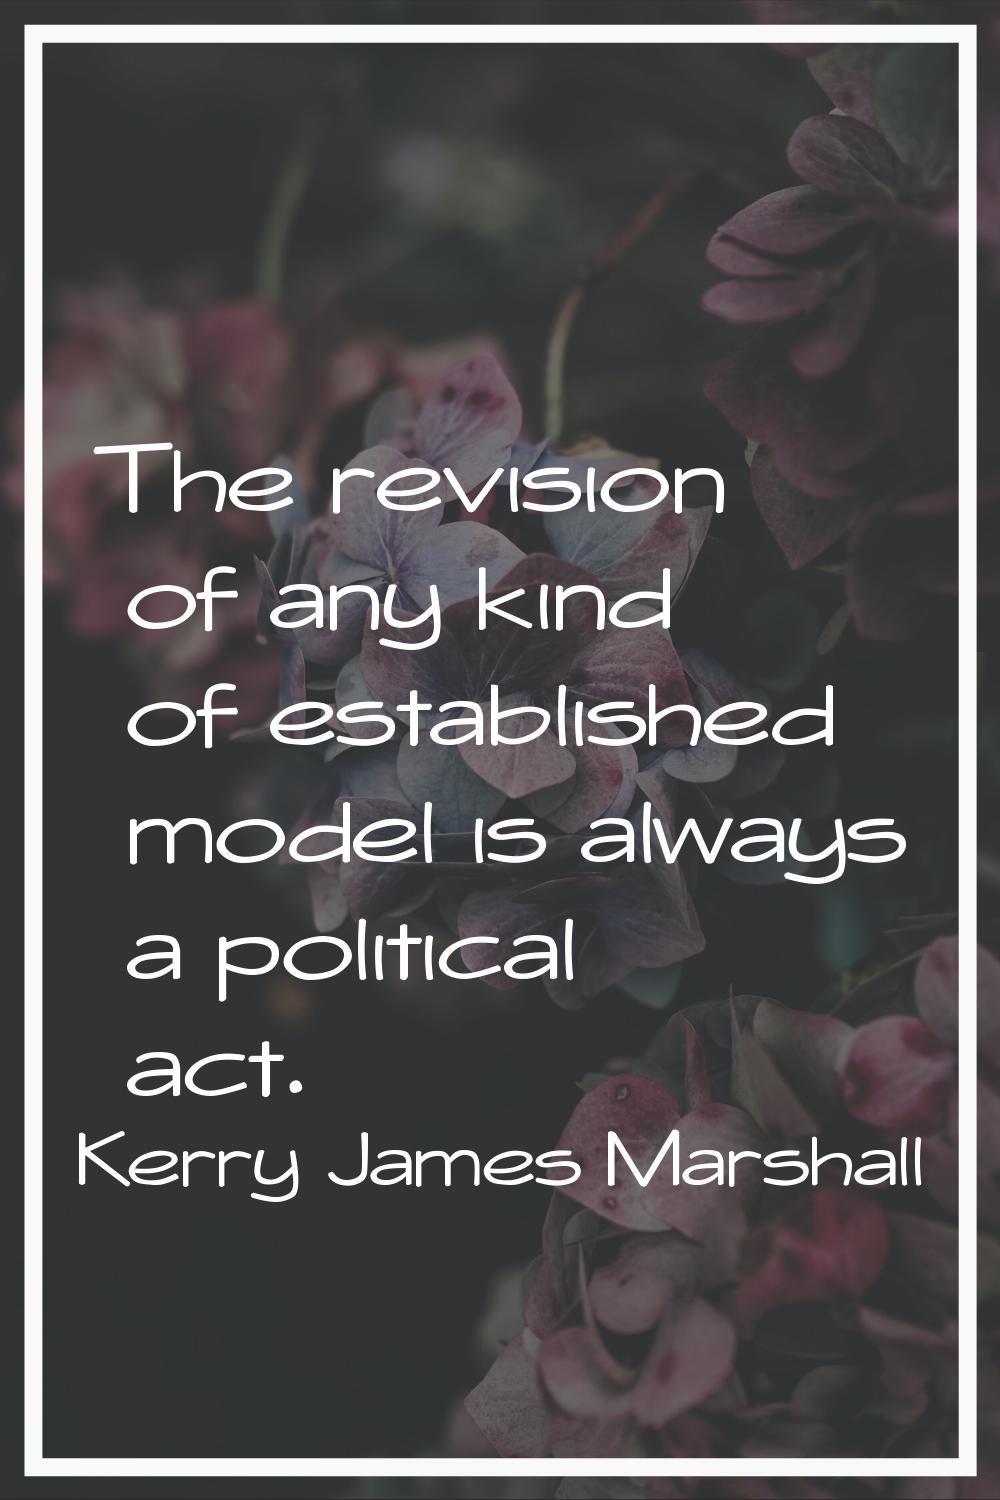 The revision of any kind of established model is always a political act.